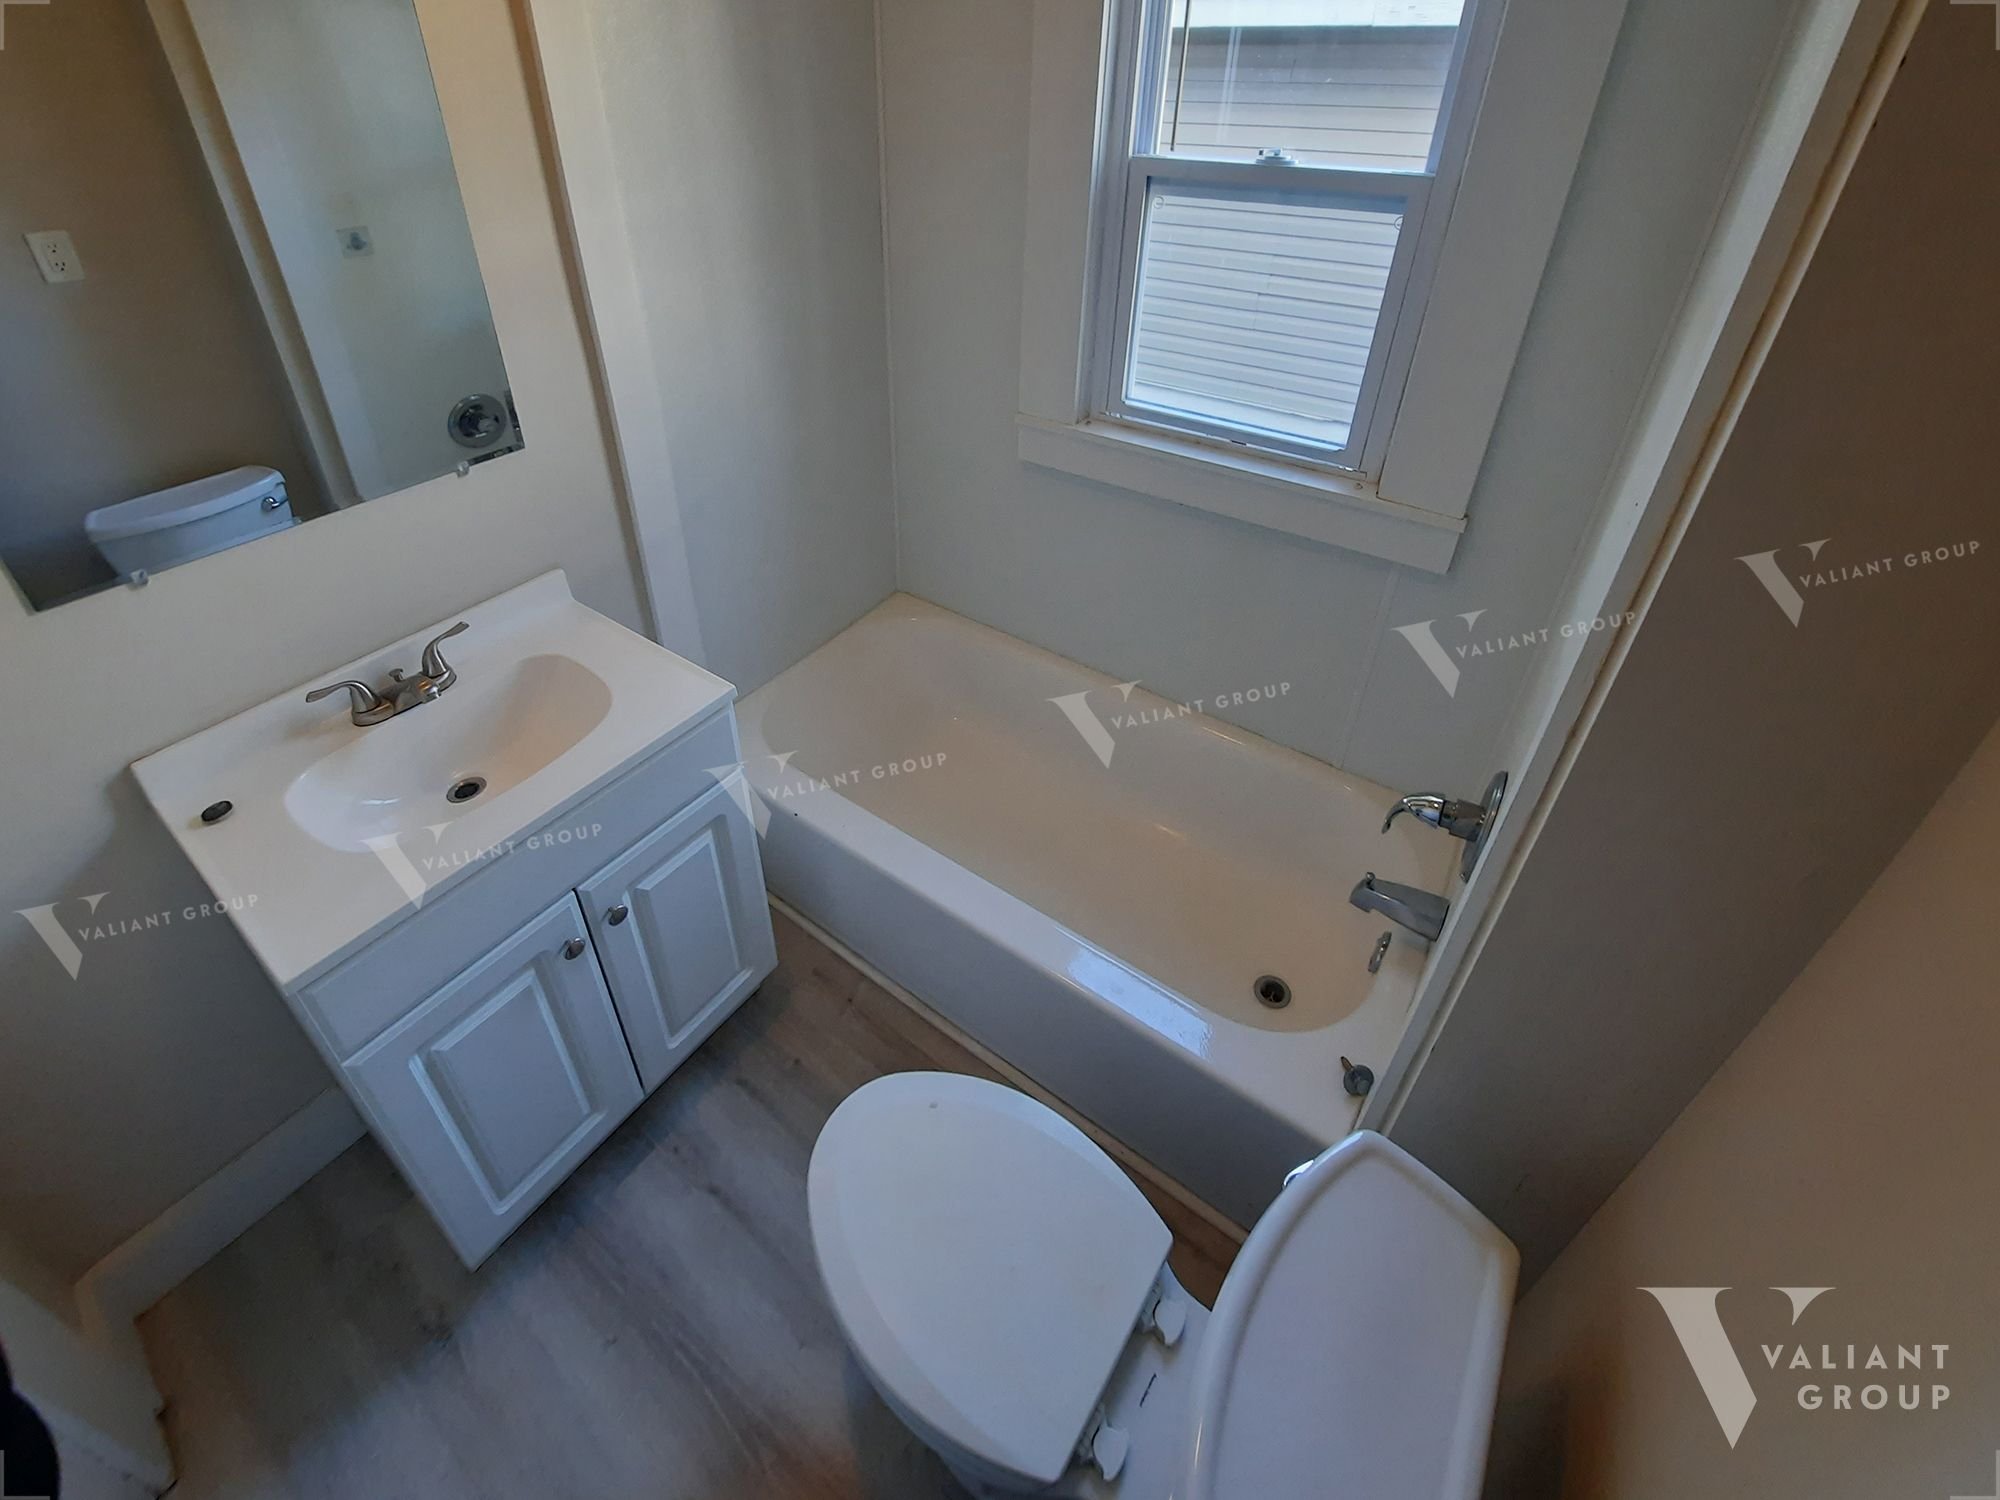 House-For-Rent-1012-S-Fort-Ave-Springfield-MO-11-Bathroom.jpg